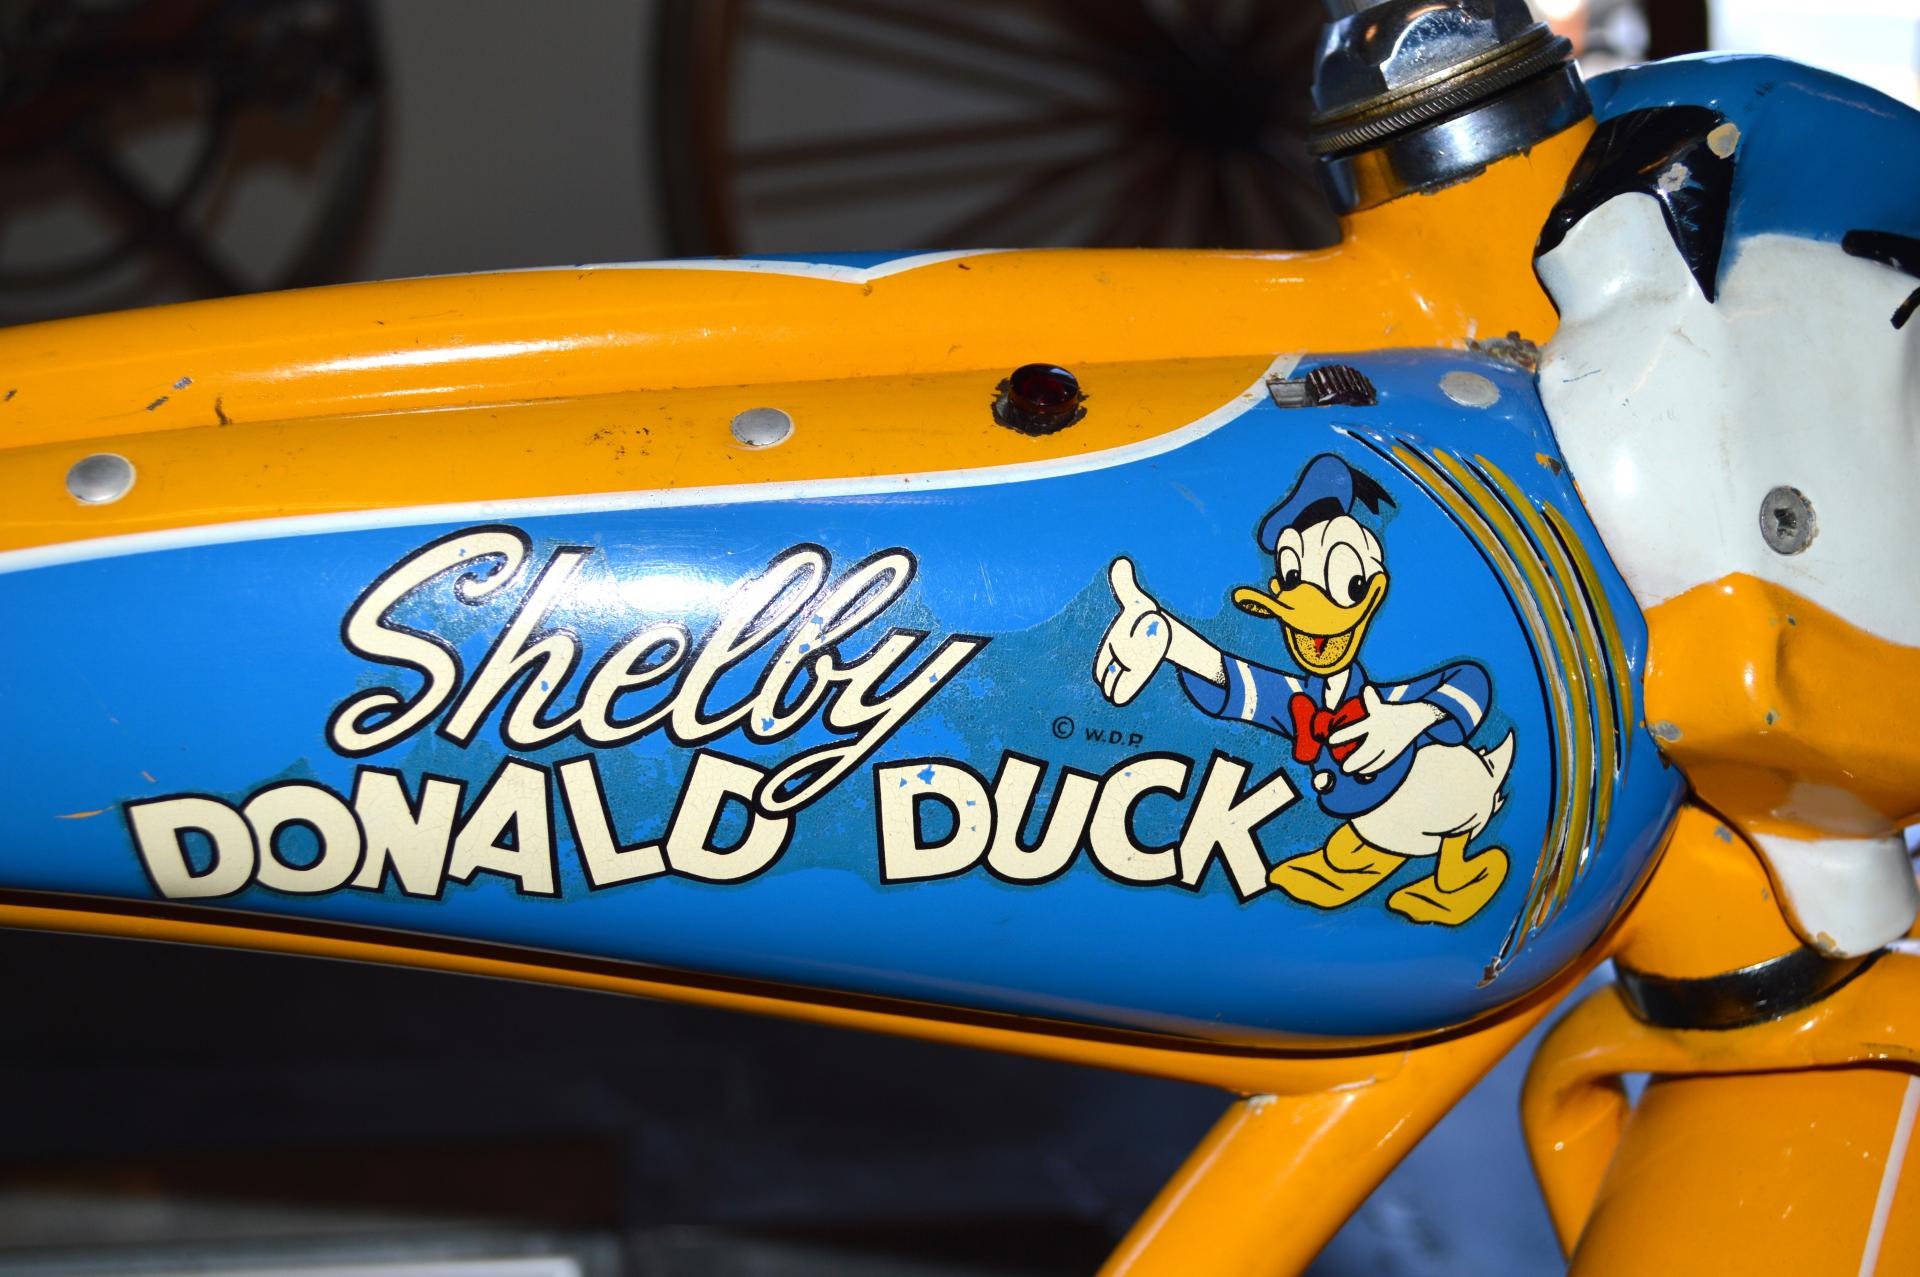 Shelby Donald Duck